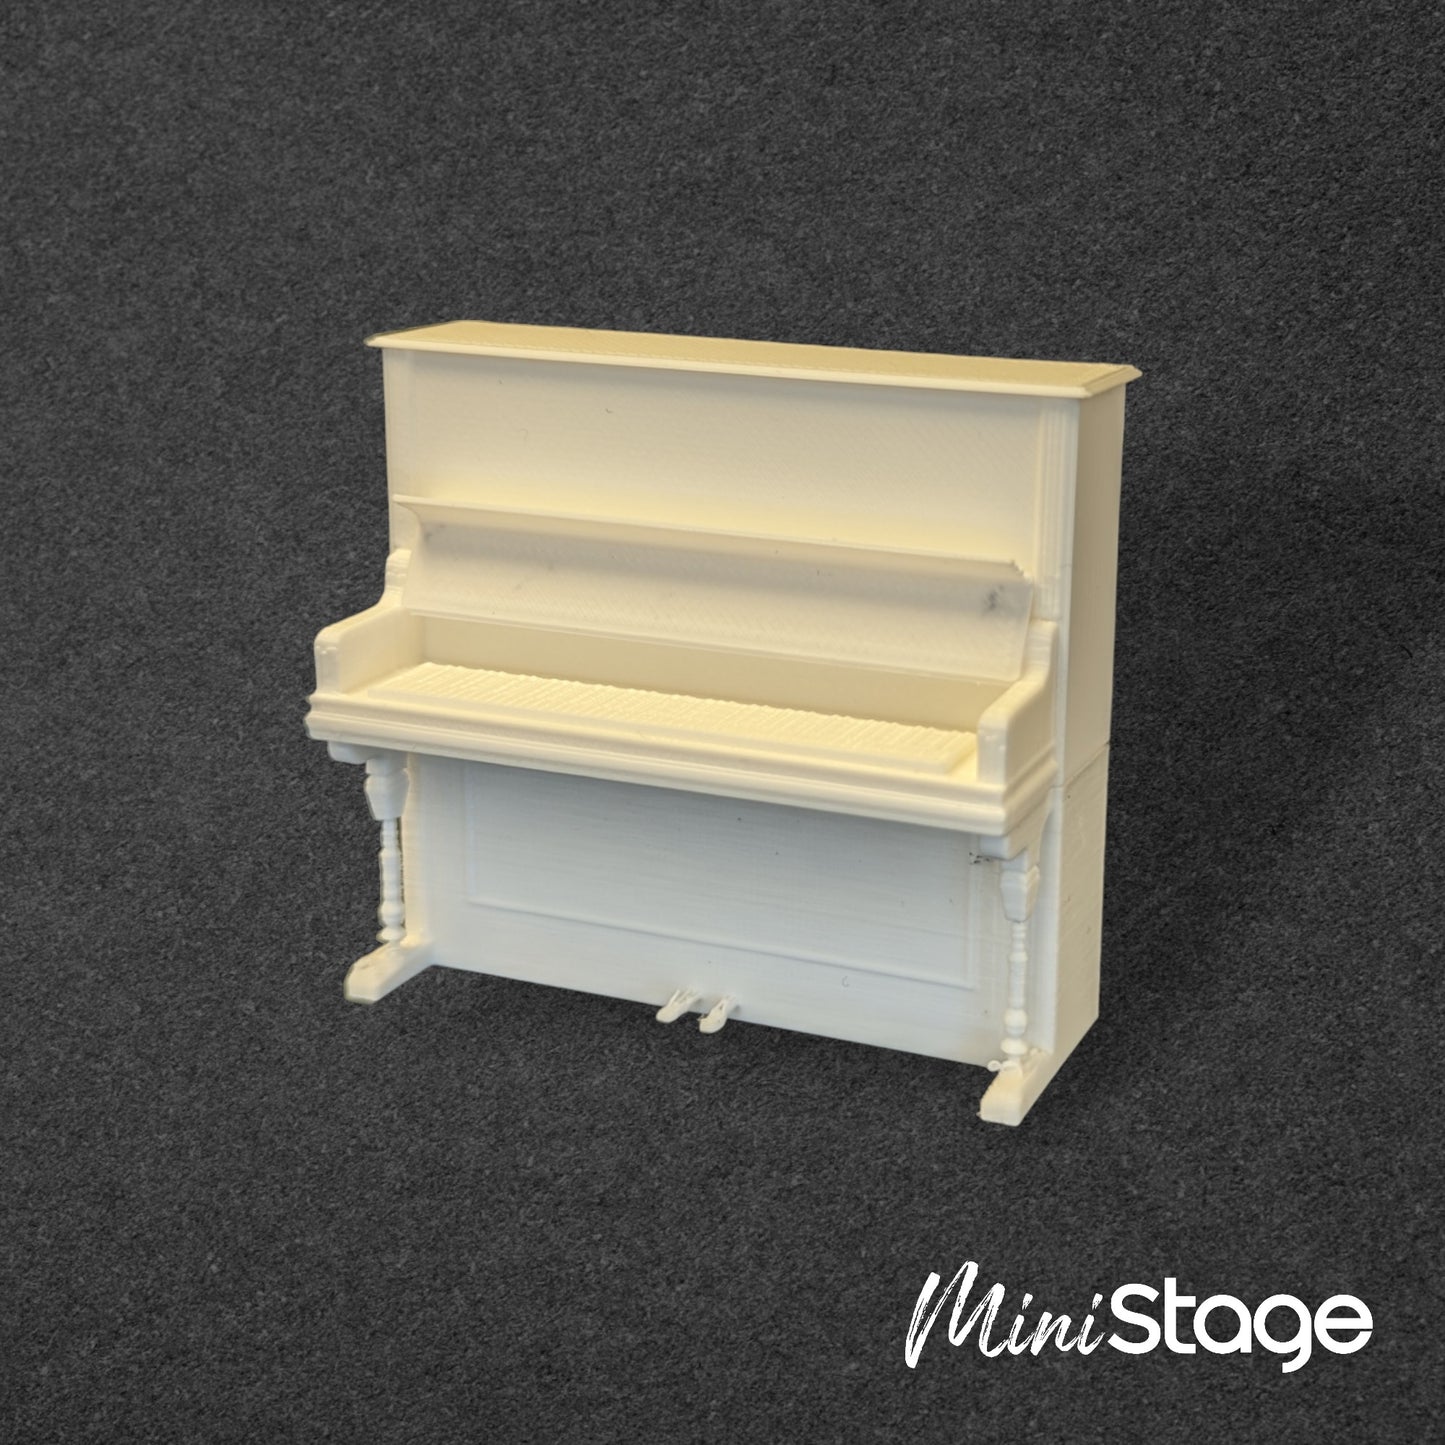 Scale 3D Printed Model of an Upright Piano